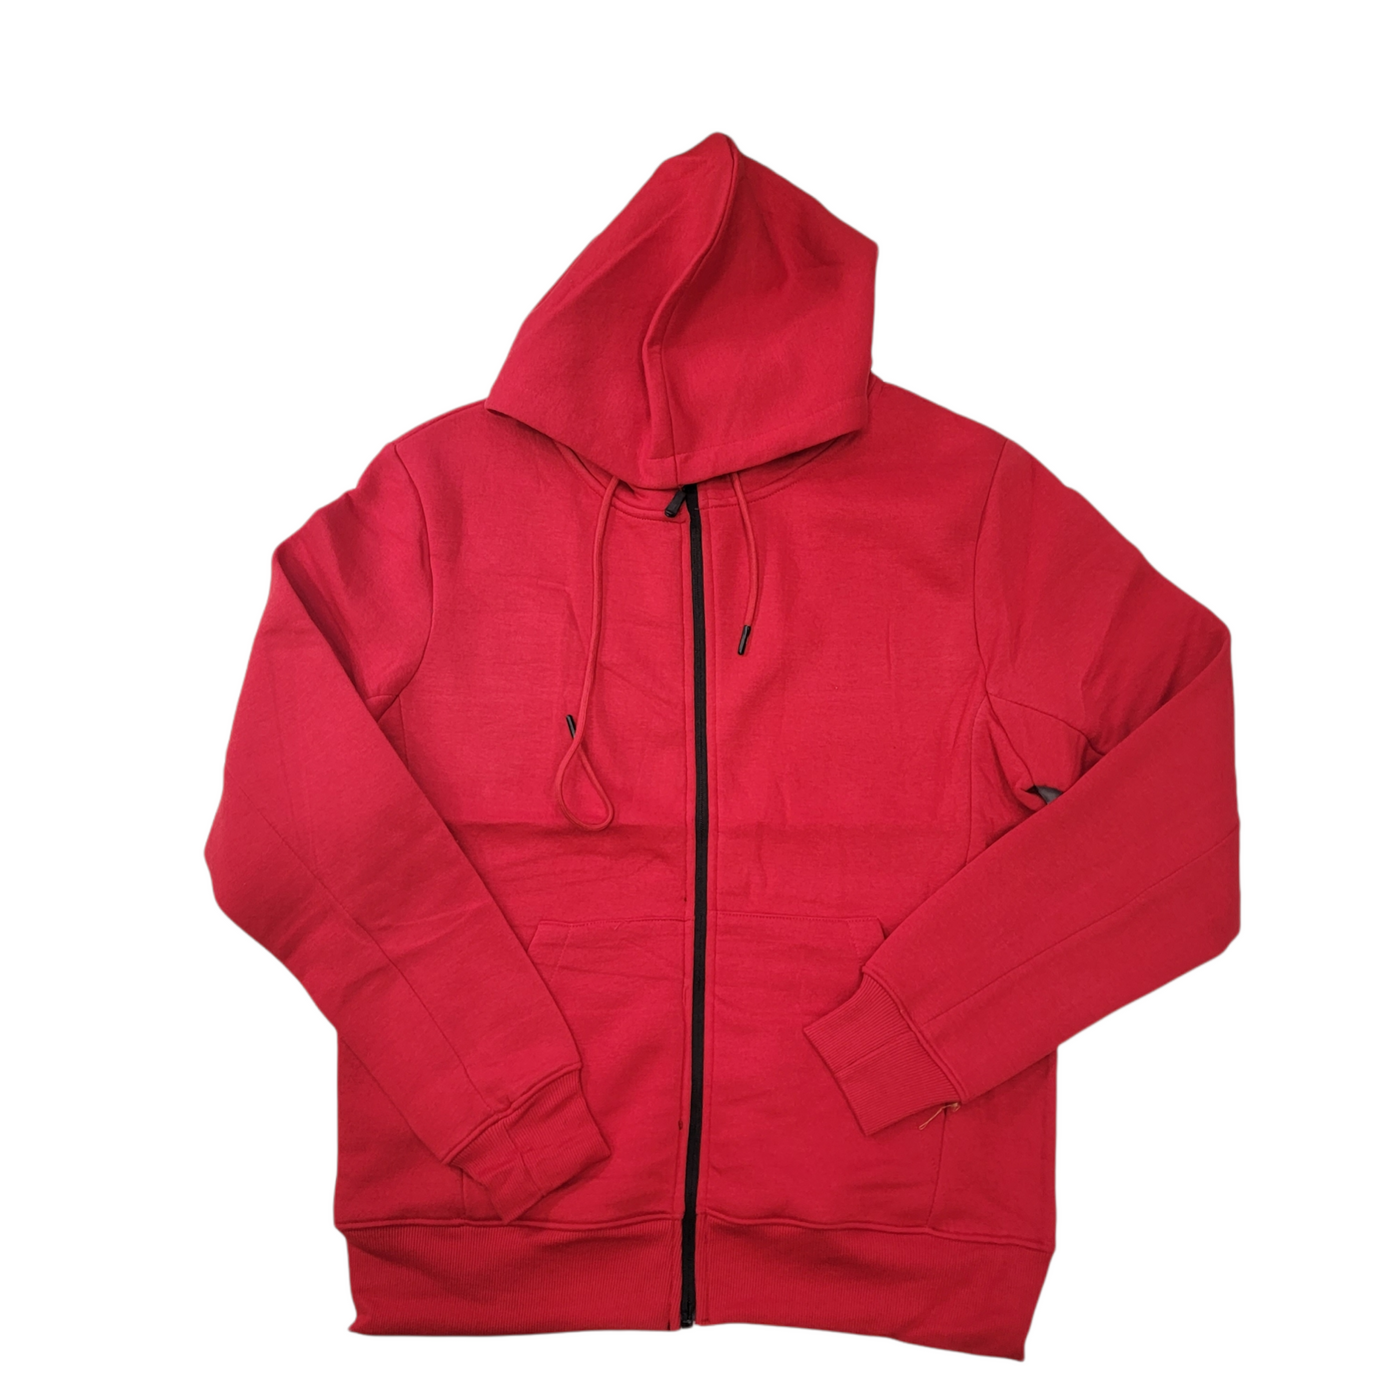 M. Society Sweat Suite Red Top & Bottom